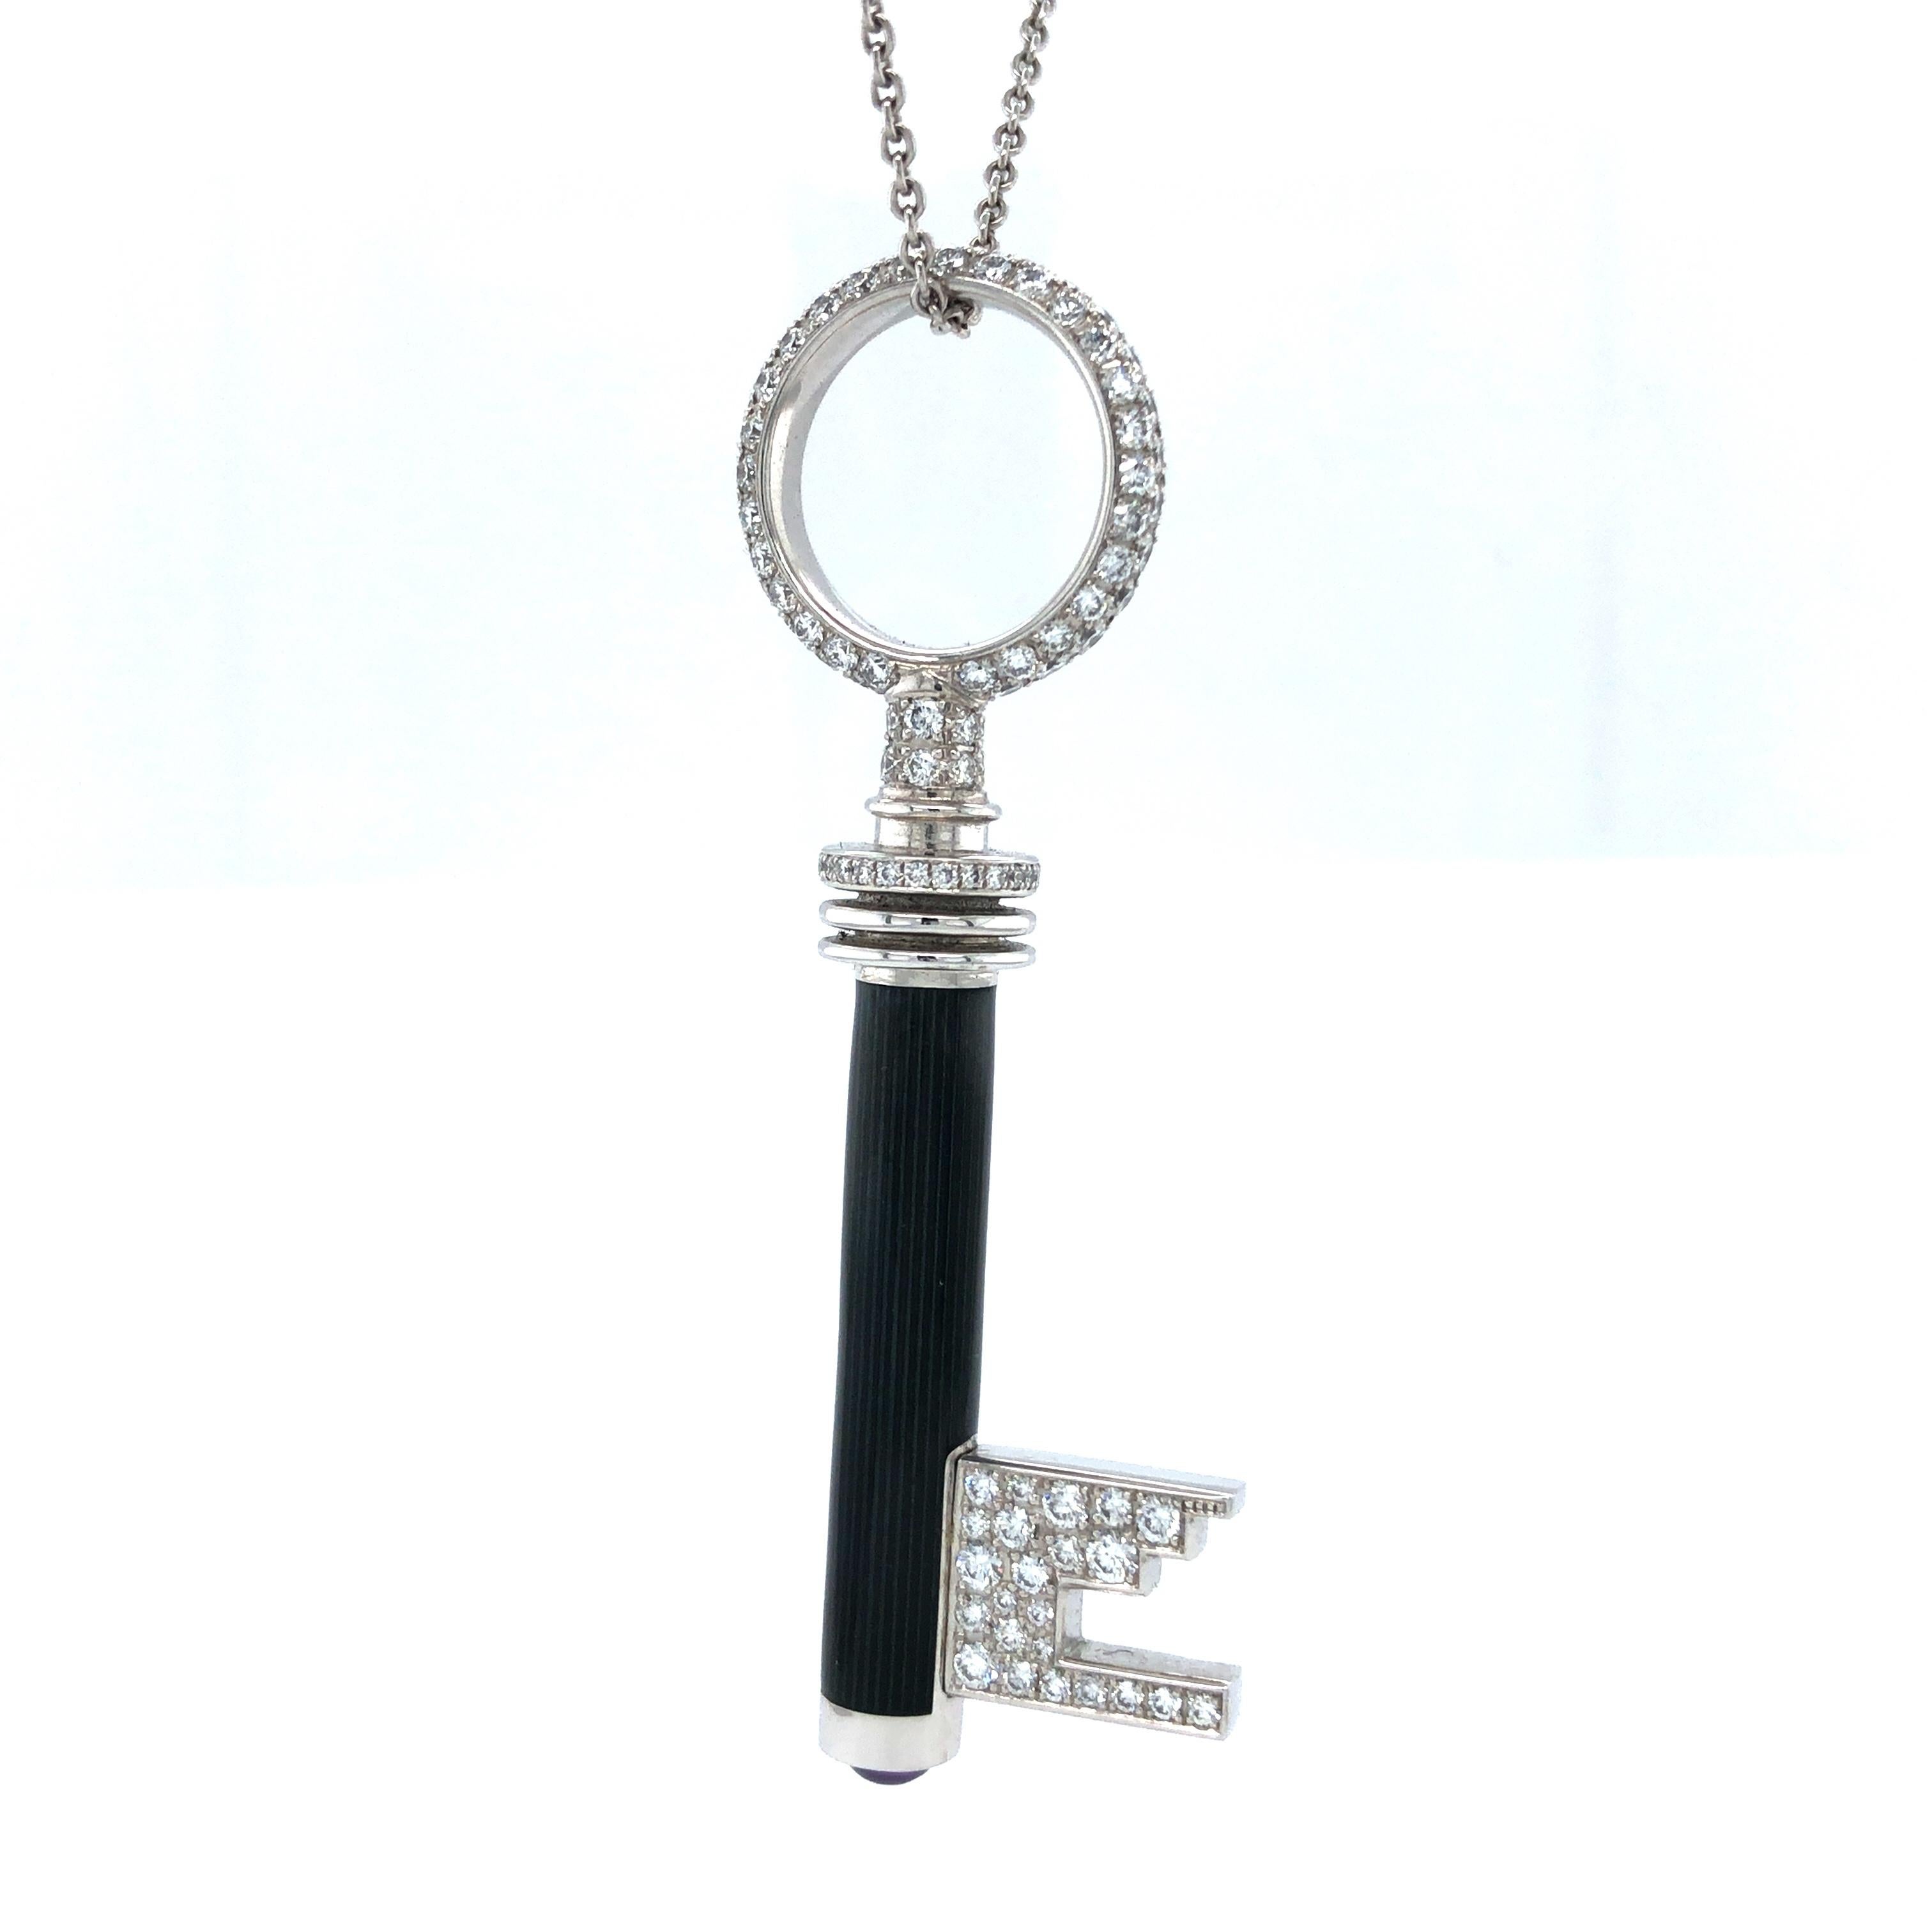 Victor Mayer key pendant 18k white gold, falcon grey vitreous enamel, 162 diamonds, total 1.90 ct, G VS brilliant cut, Amethyst

About the creator Victor Mayer
Victor Mayer is internationally renowned for elegant timeless designs and unrivalled